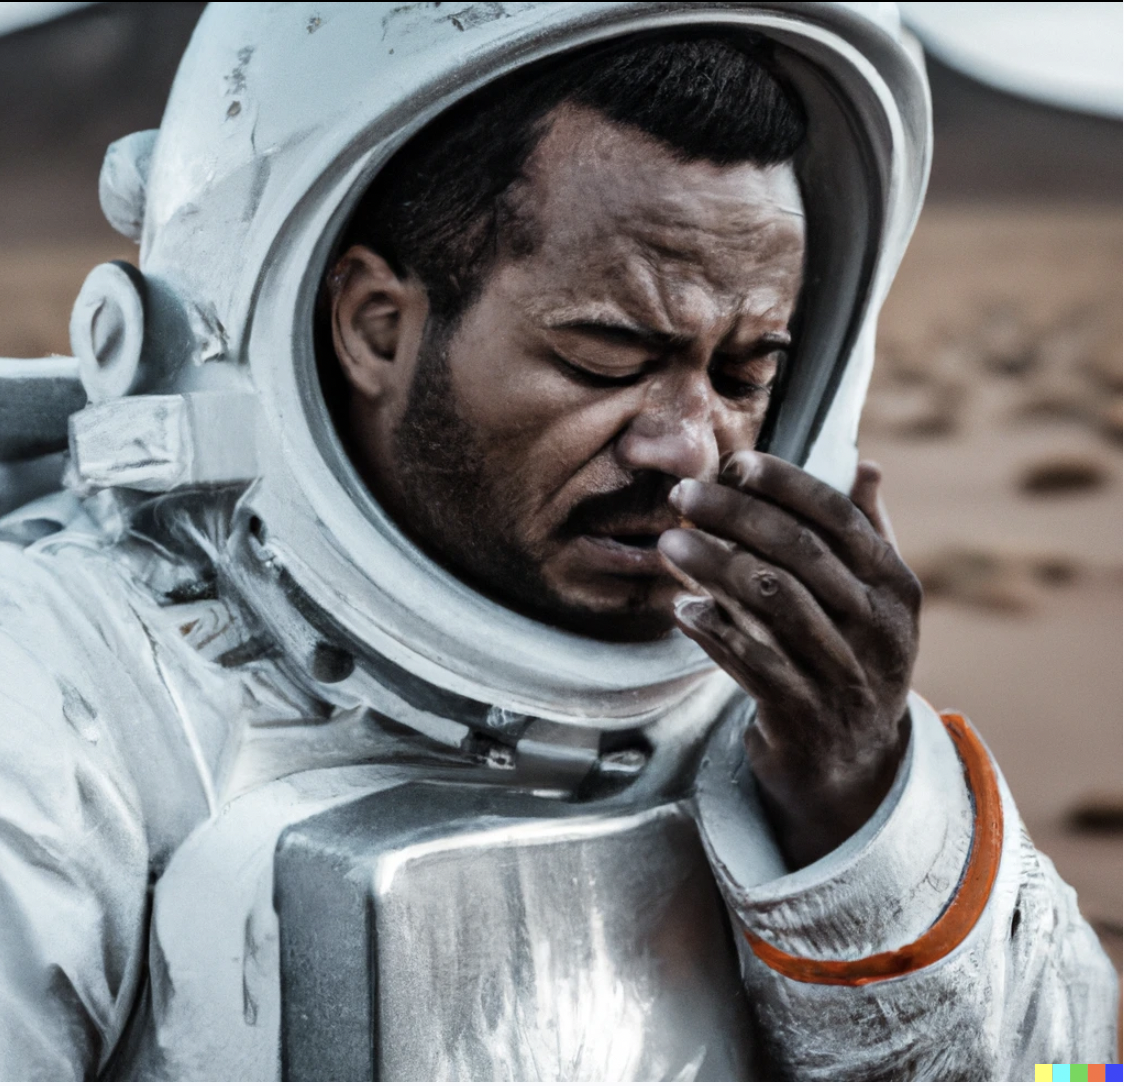 An astronaut crying while stranded on a desolate planet - DALL·E 2